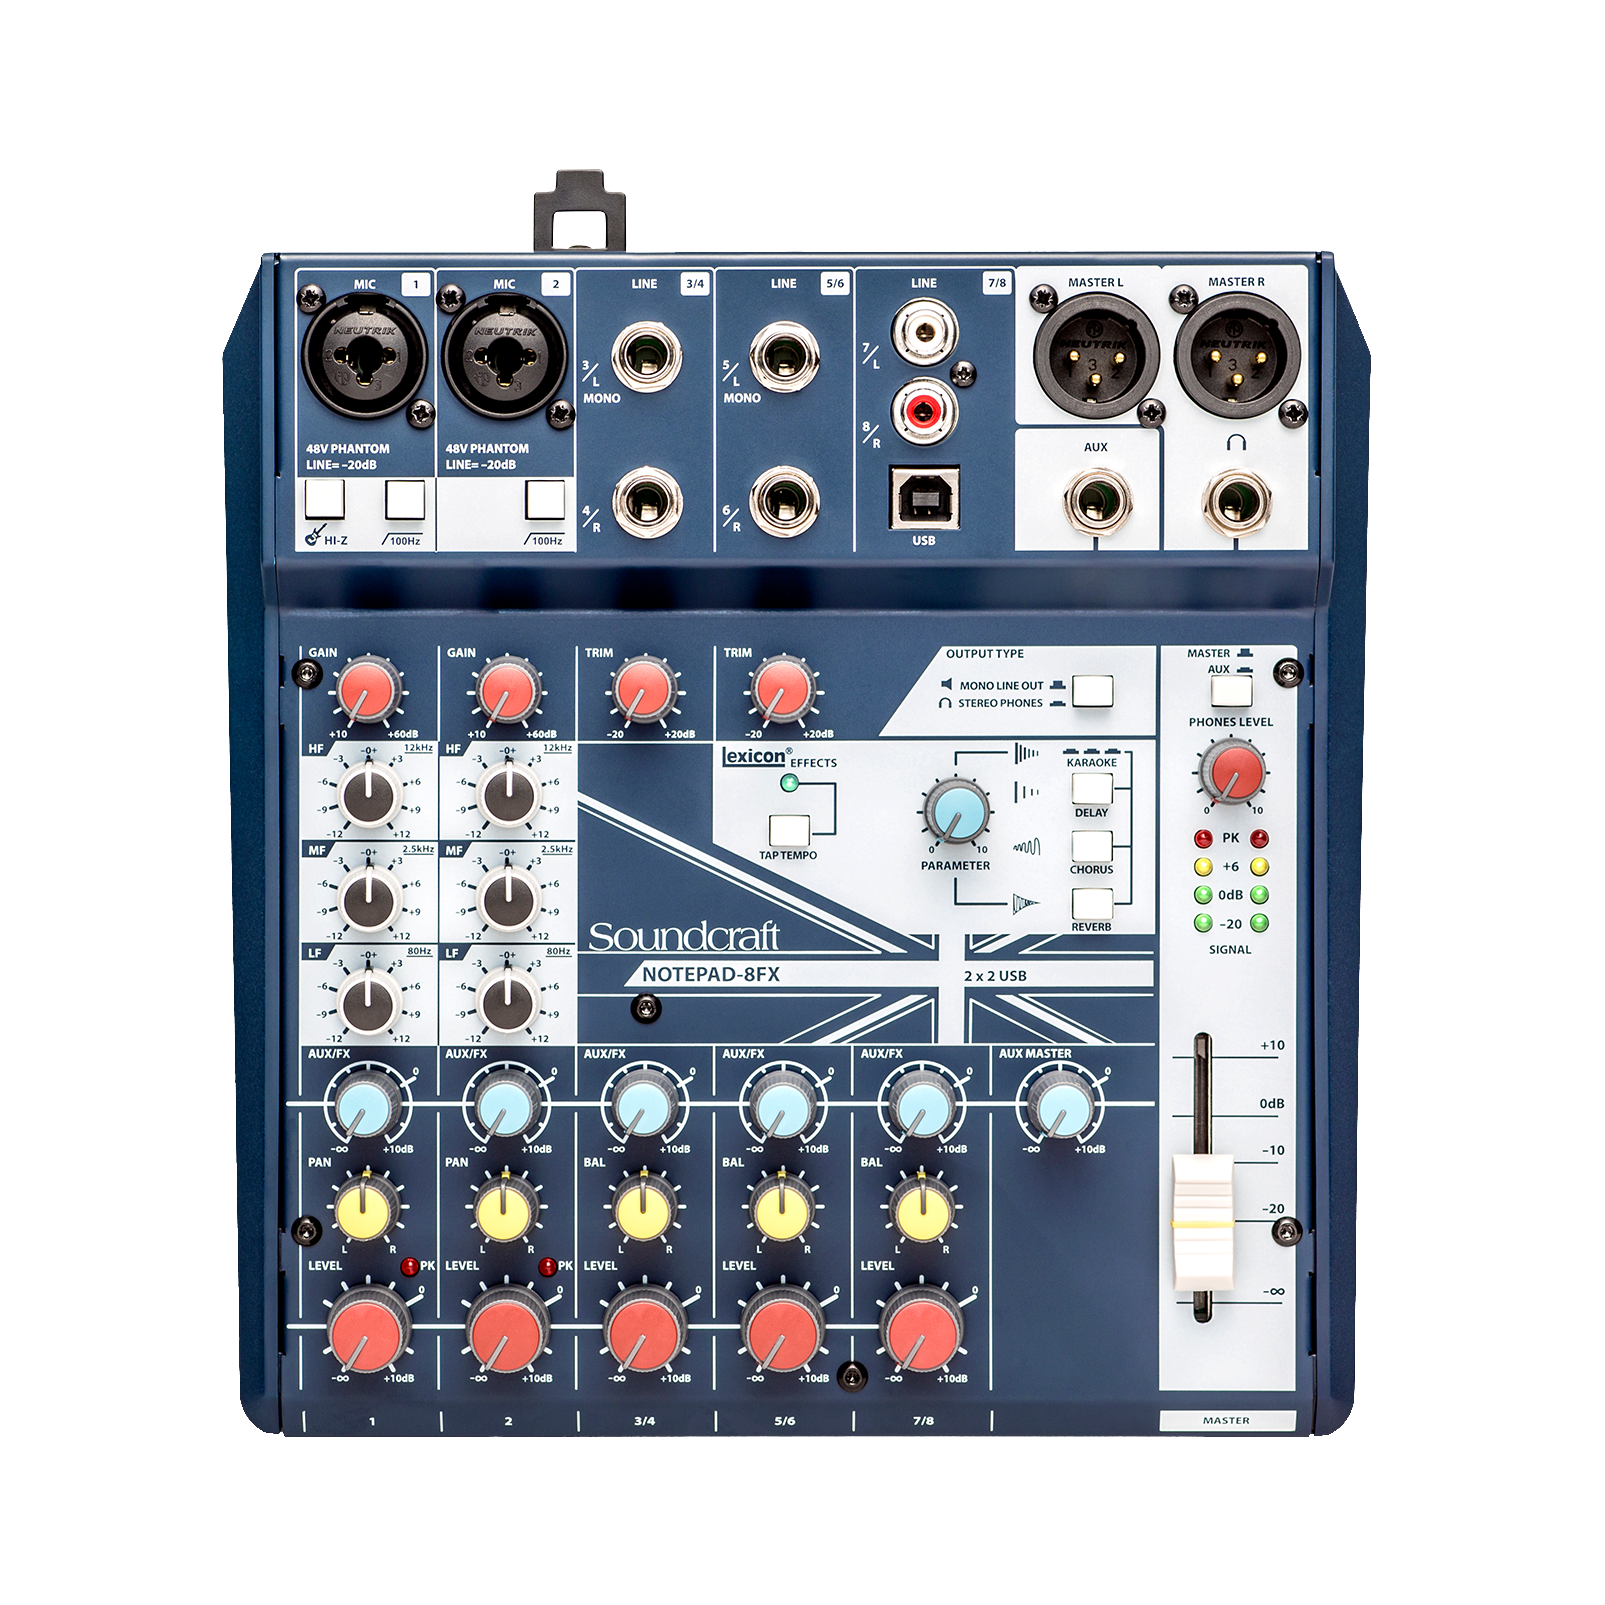 Notepad-8FX - Dark Blue - Small-format analog mixing console with USB I/O and Lexicon effects - Front